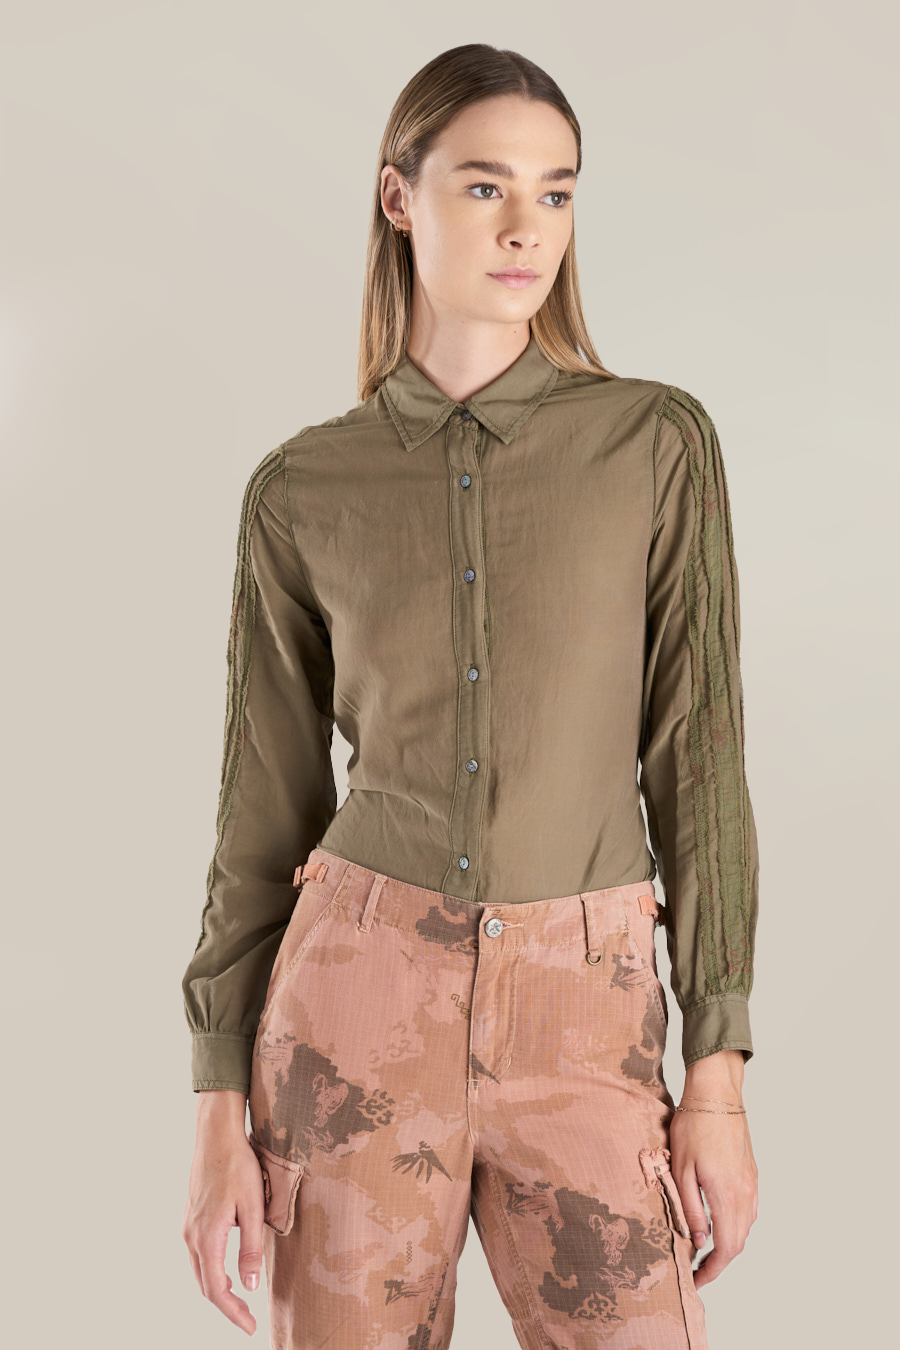 Silk long sleeves blouse in New Olive